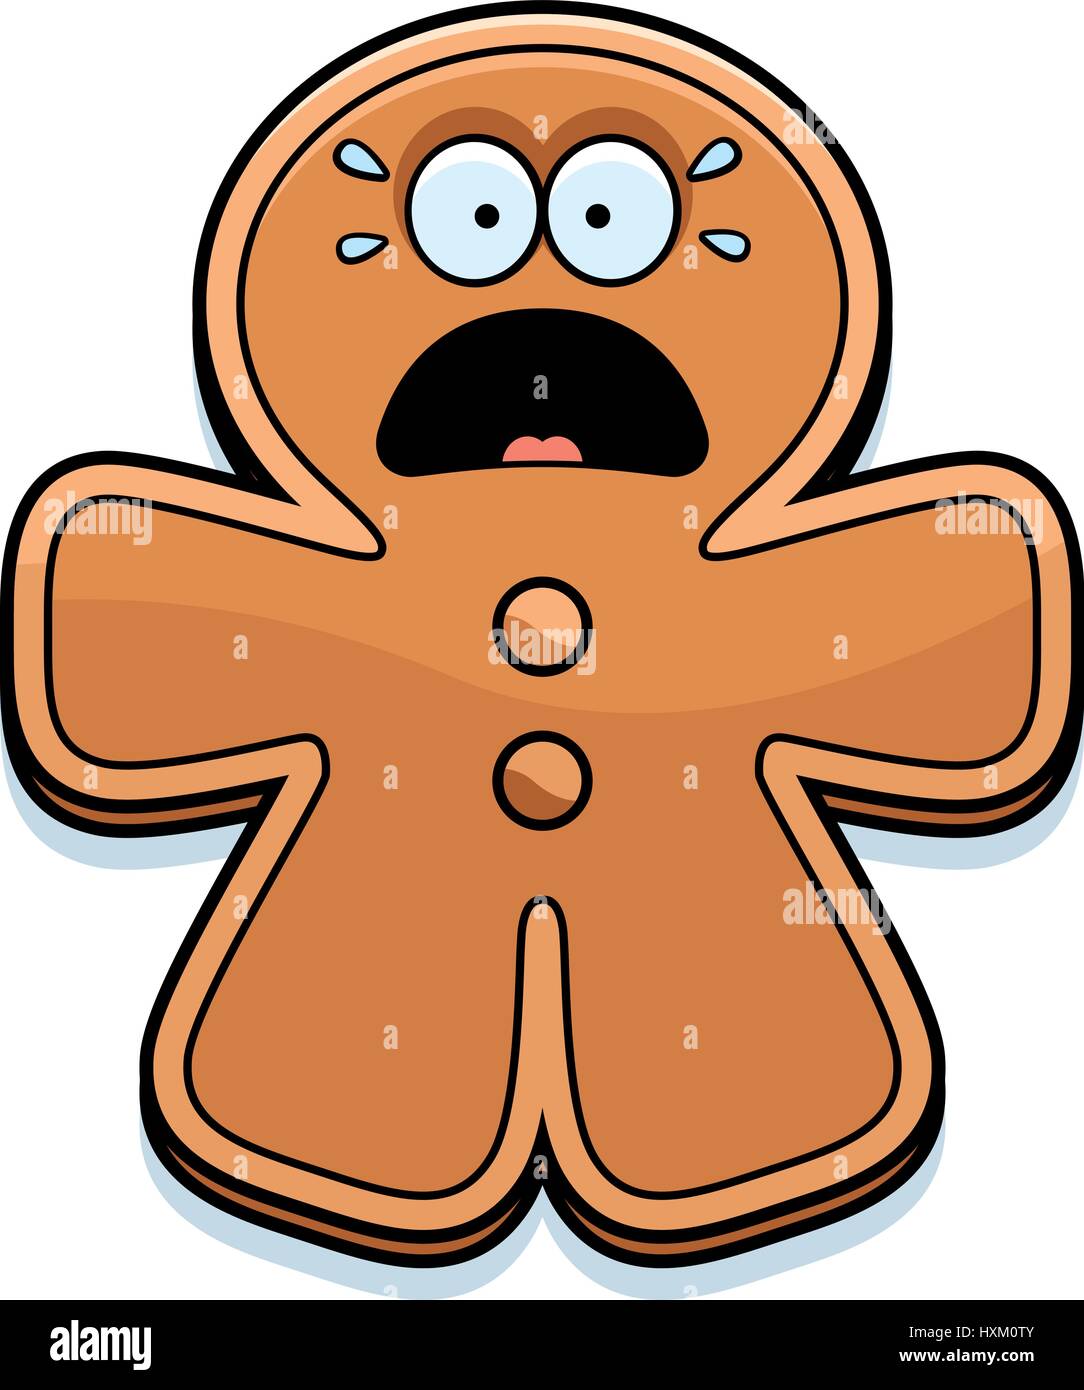 A cartoon illustration of a gingerbread man looking scared. Stock Vector